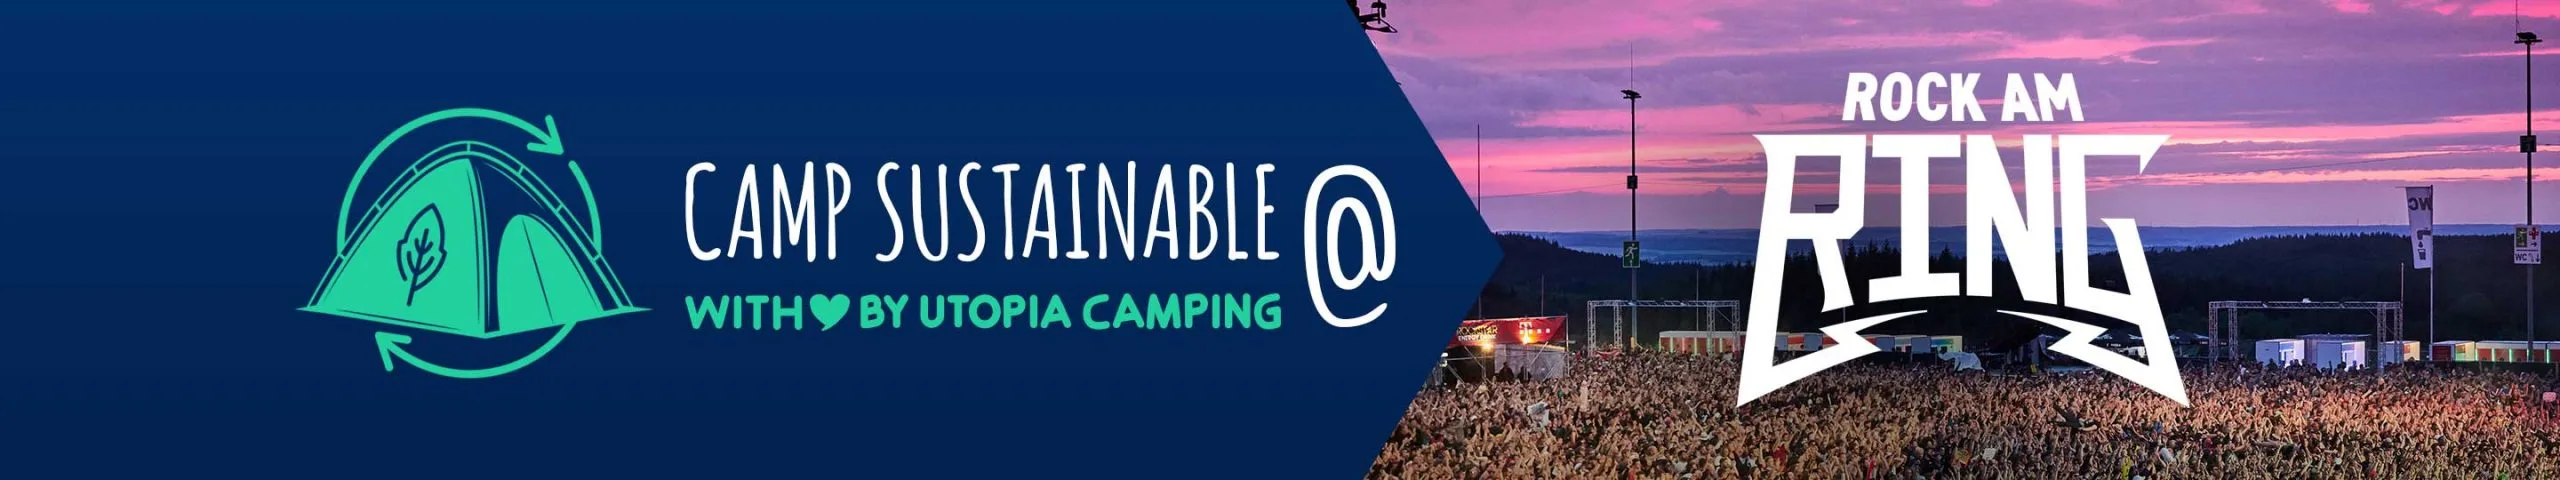 Sustainable solutions for festival-goers - Utopia Camping - With our sustainable solutions at festivals, we tackle piles of garbage full of camping gear by reusing camping stuff left behind. rent a tent, festival, camping equipment for rent 